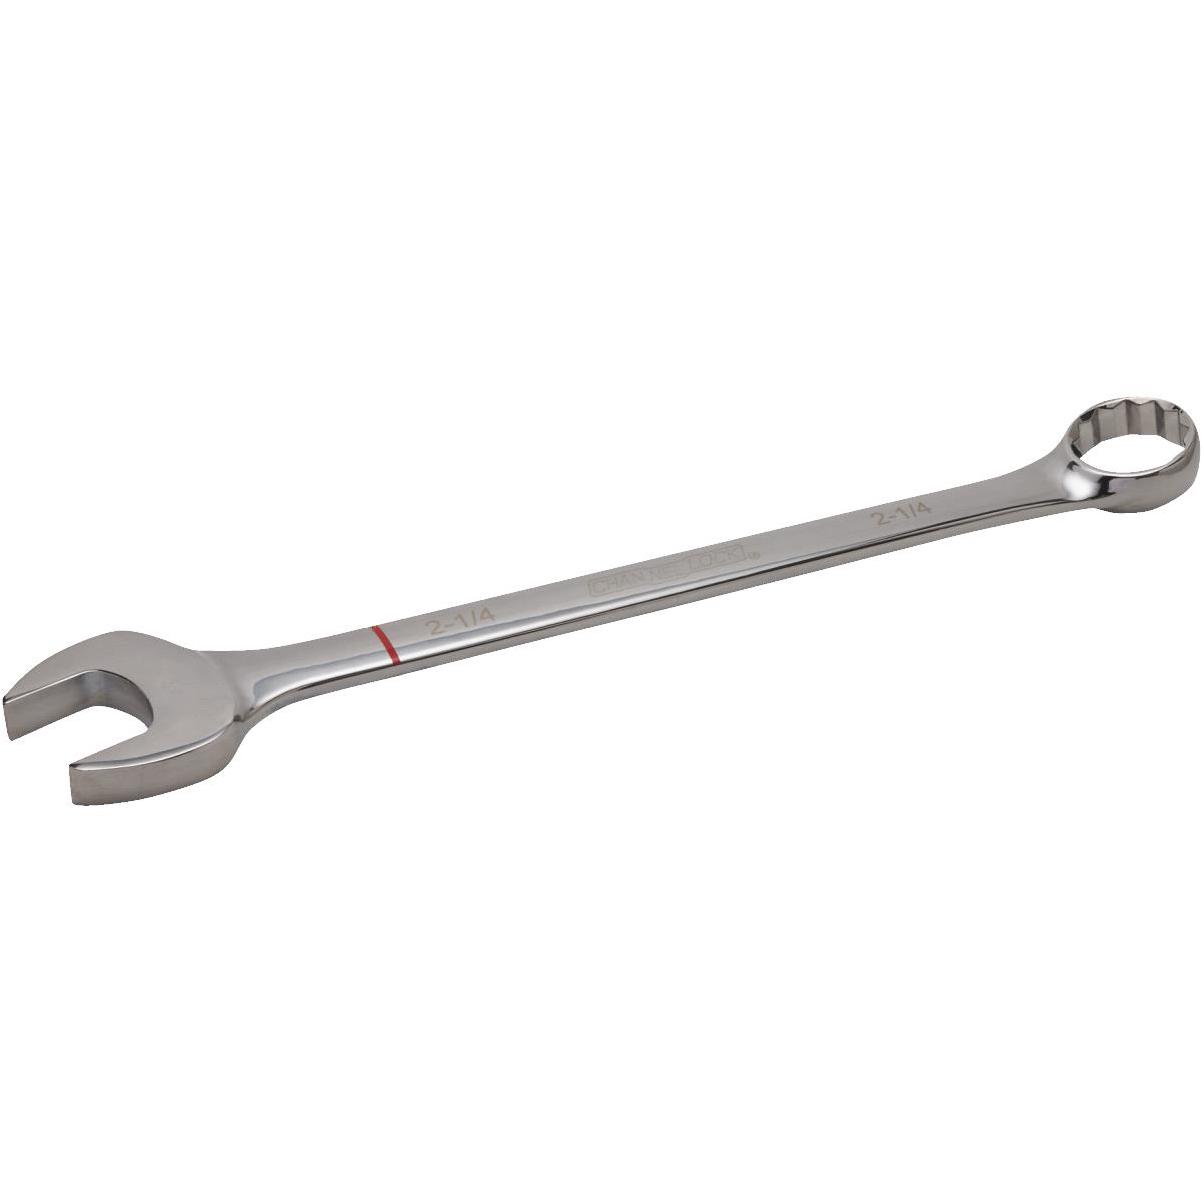 Plier Wrench, 10-Inch - D53010 | Klein Tools